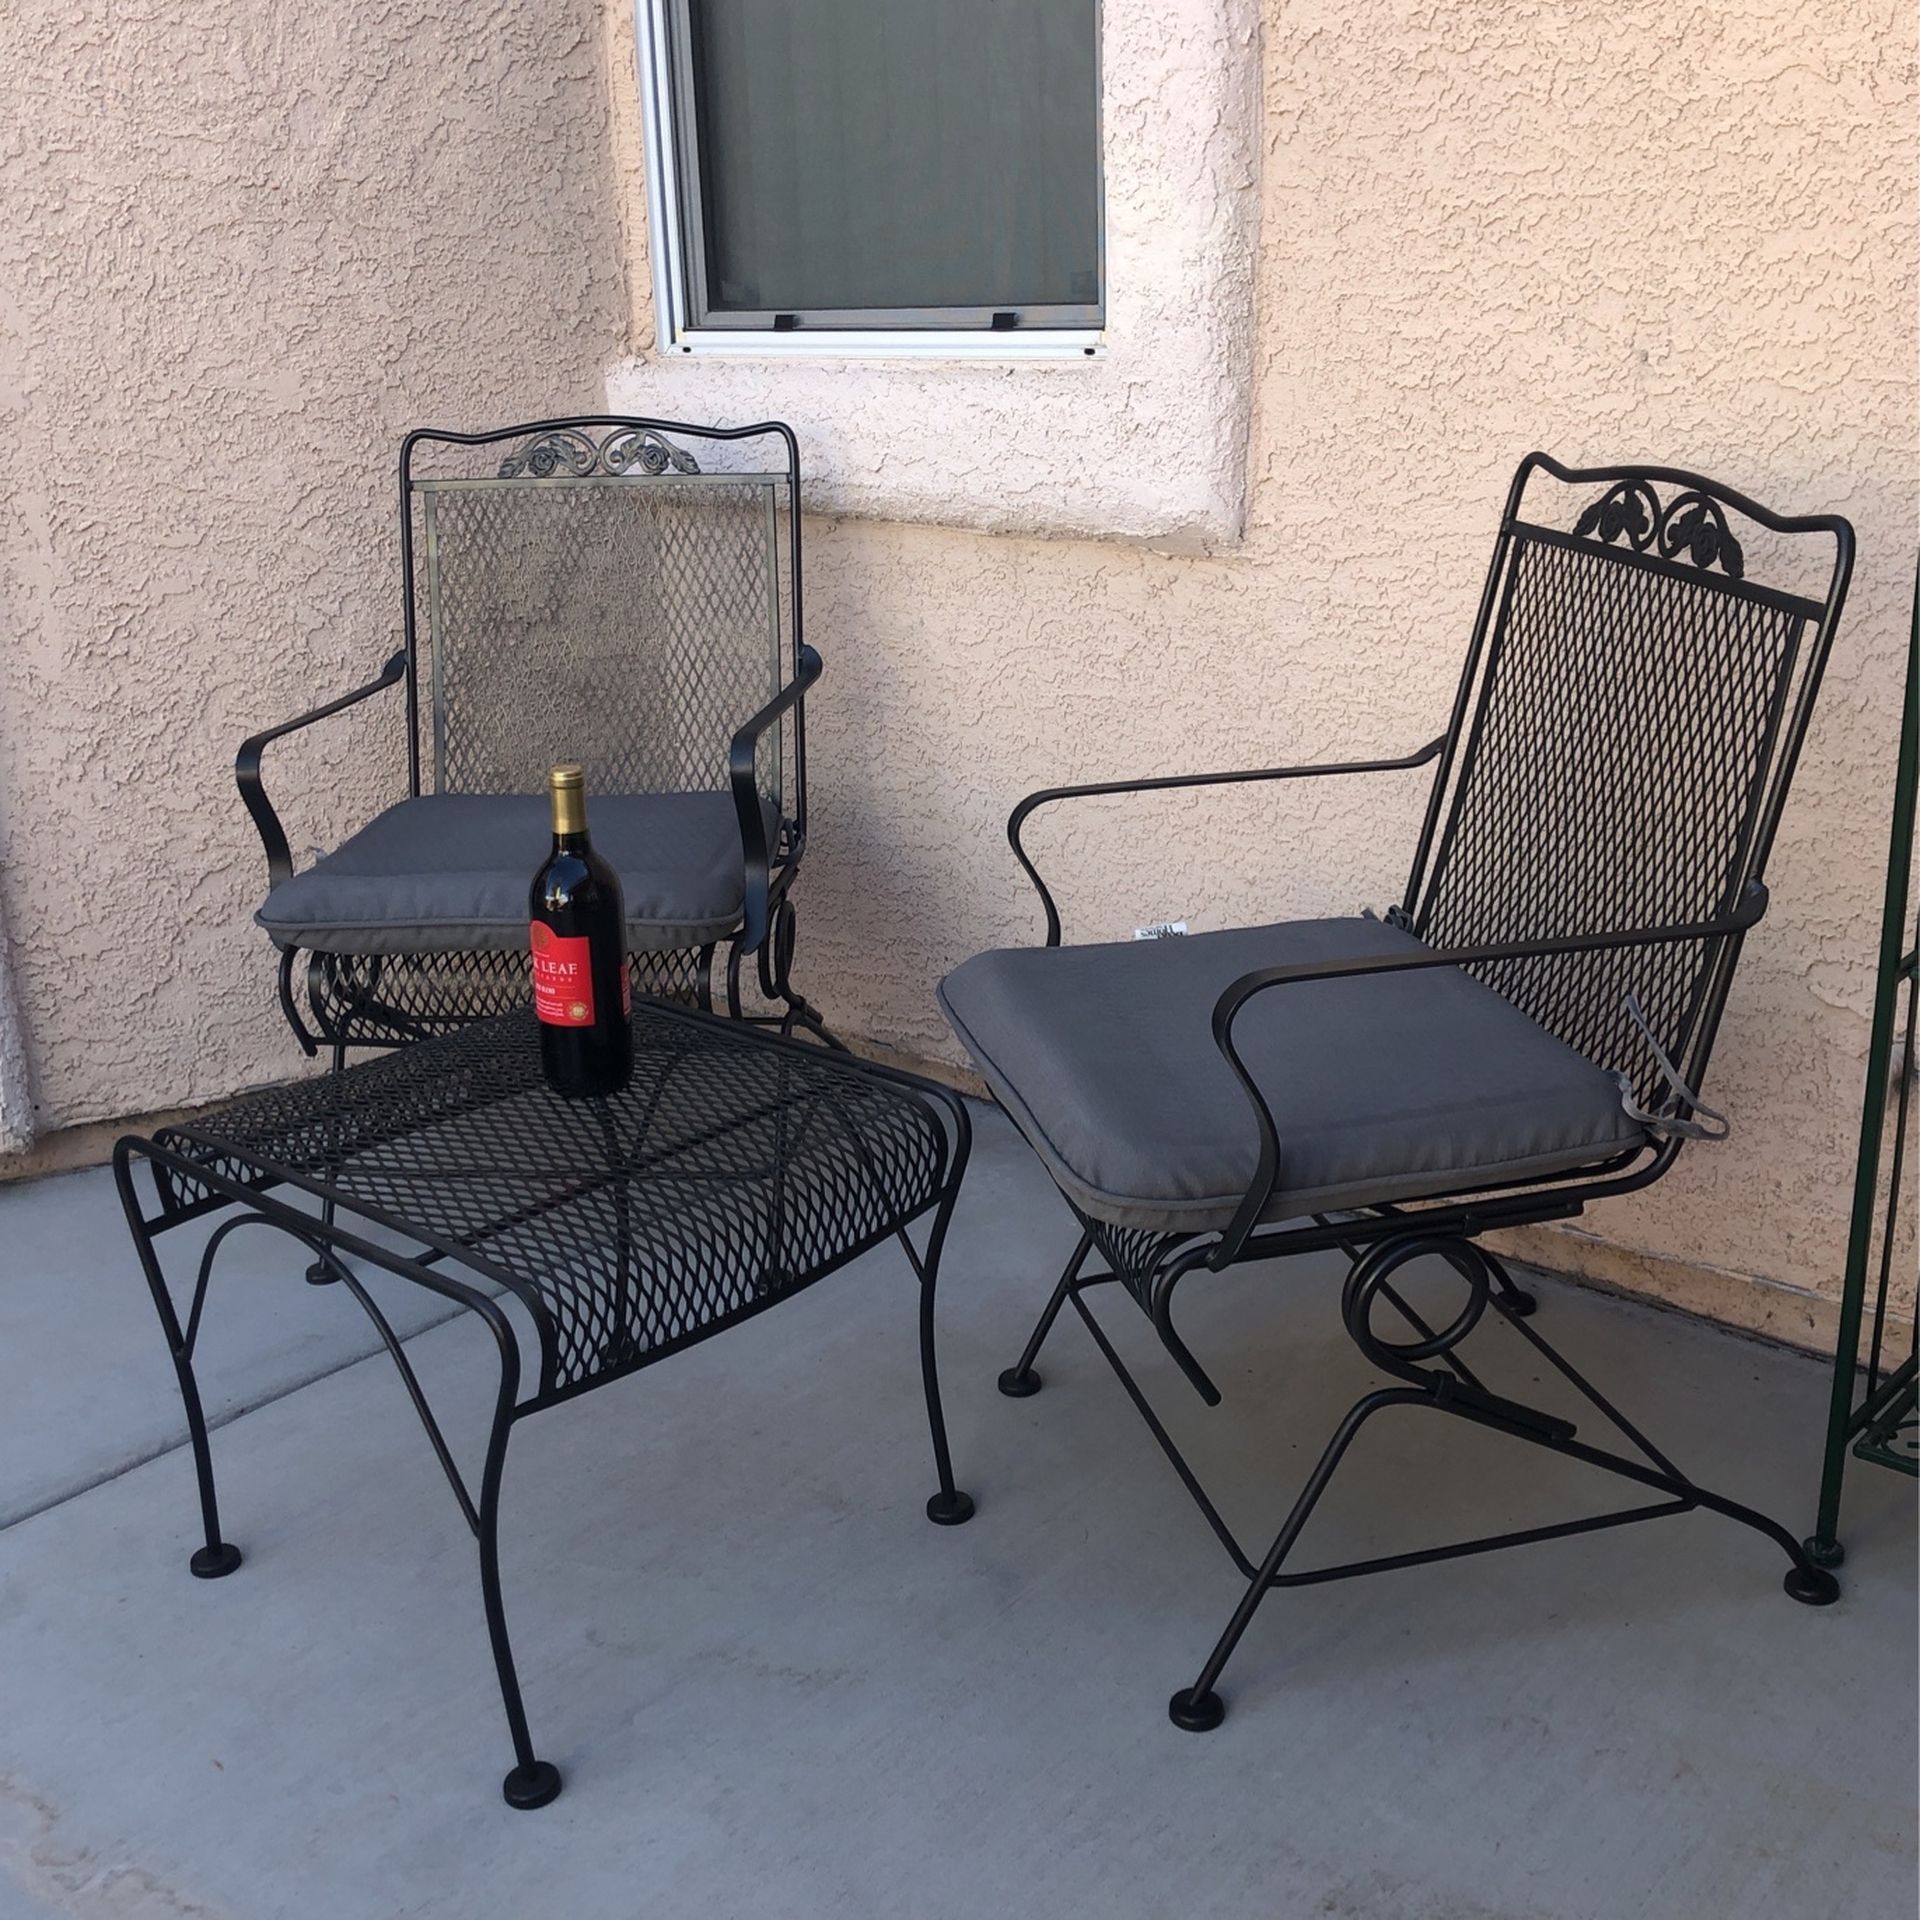 Patio Furniture, Chairs And Table